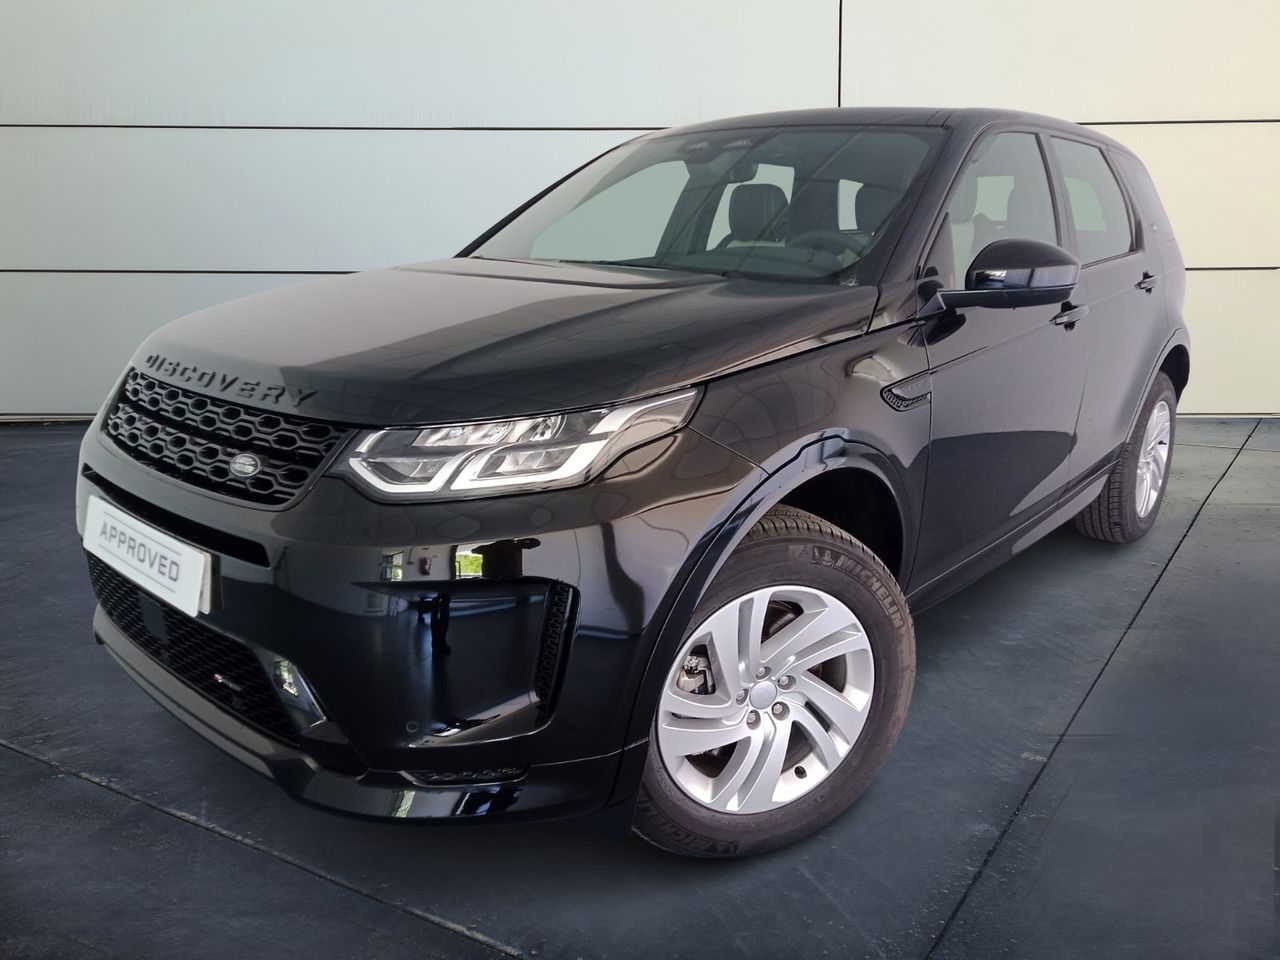 Land-Rover Discovery Sport 2.0D TD4 163PS AWD Aut MHEV R-Dynamic S  - Foto 1